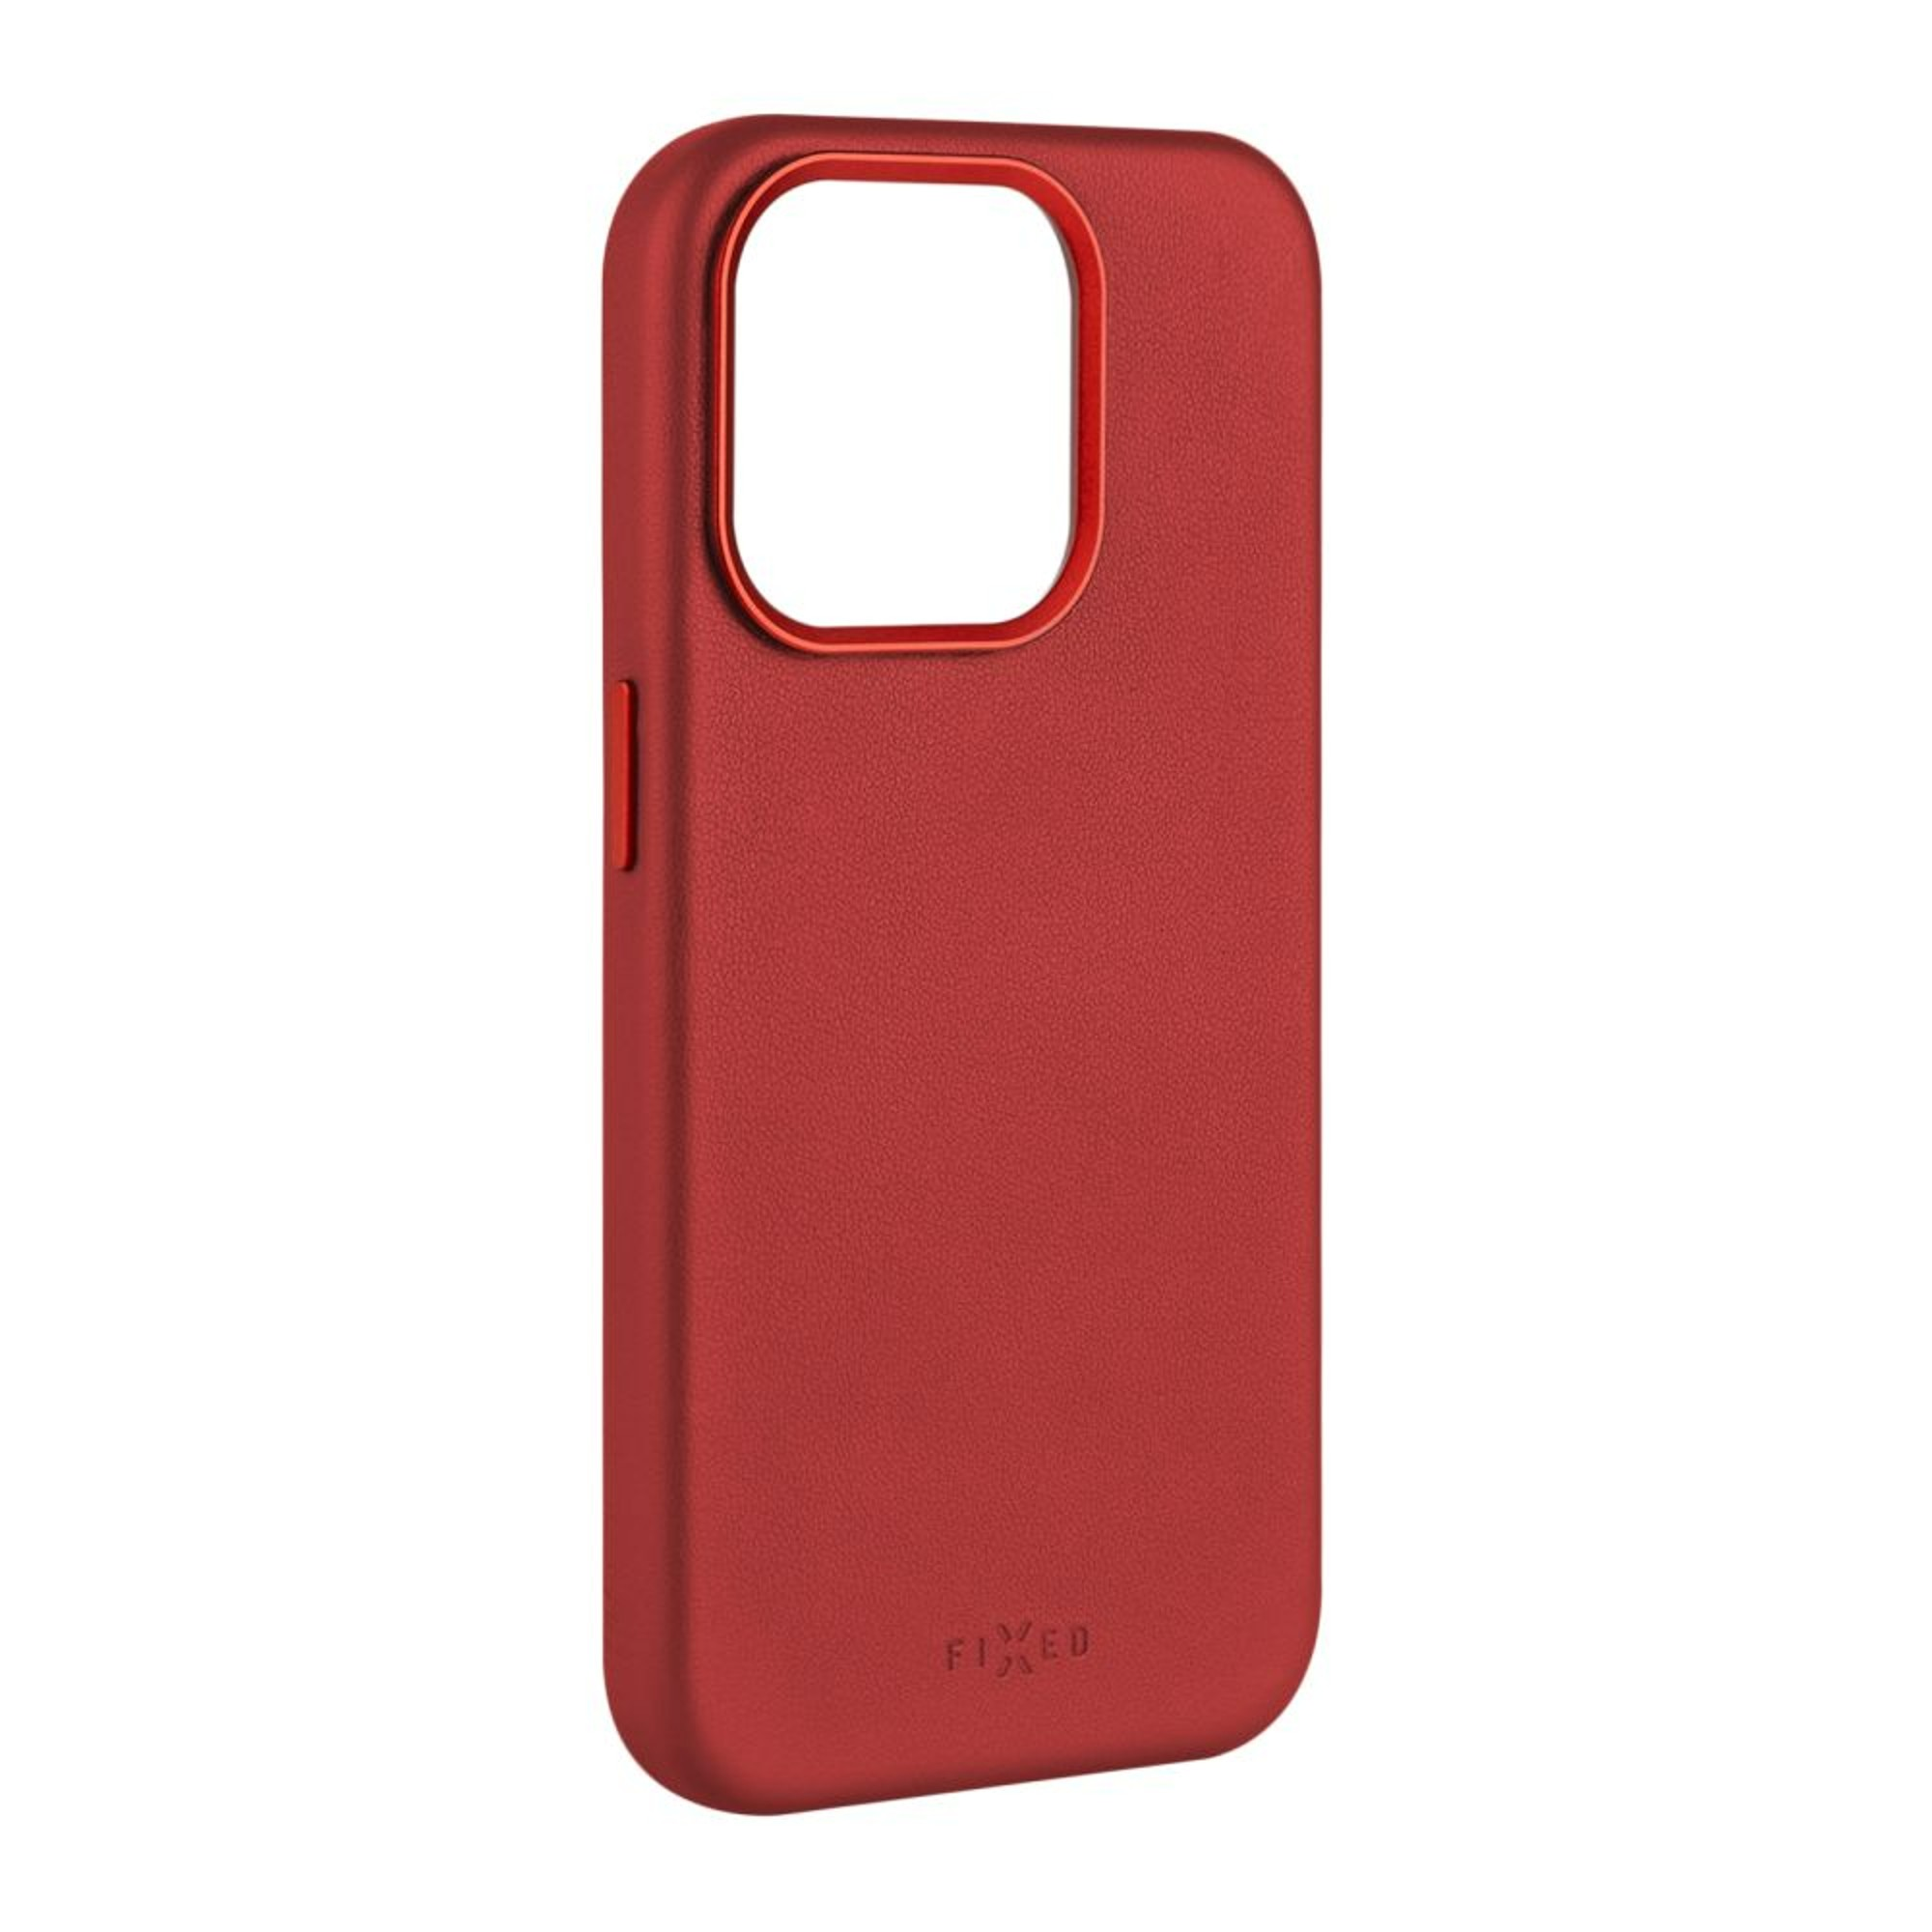 iPhone Pro, FIXED Apple, Backcover, MagLeather FIXLM-1202-RD, Rot 15